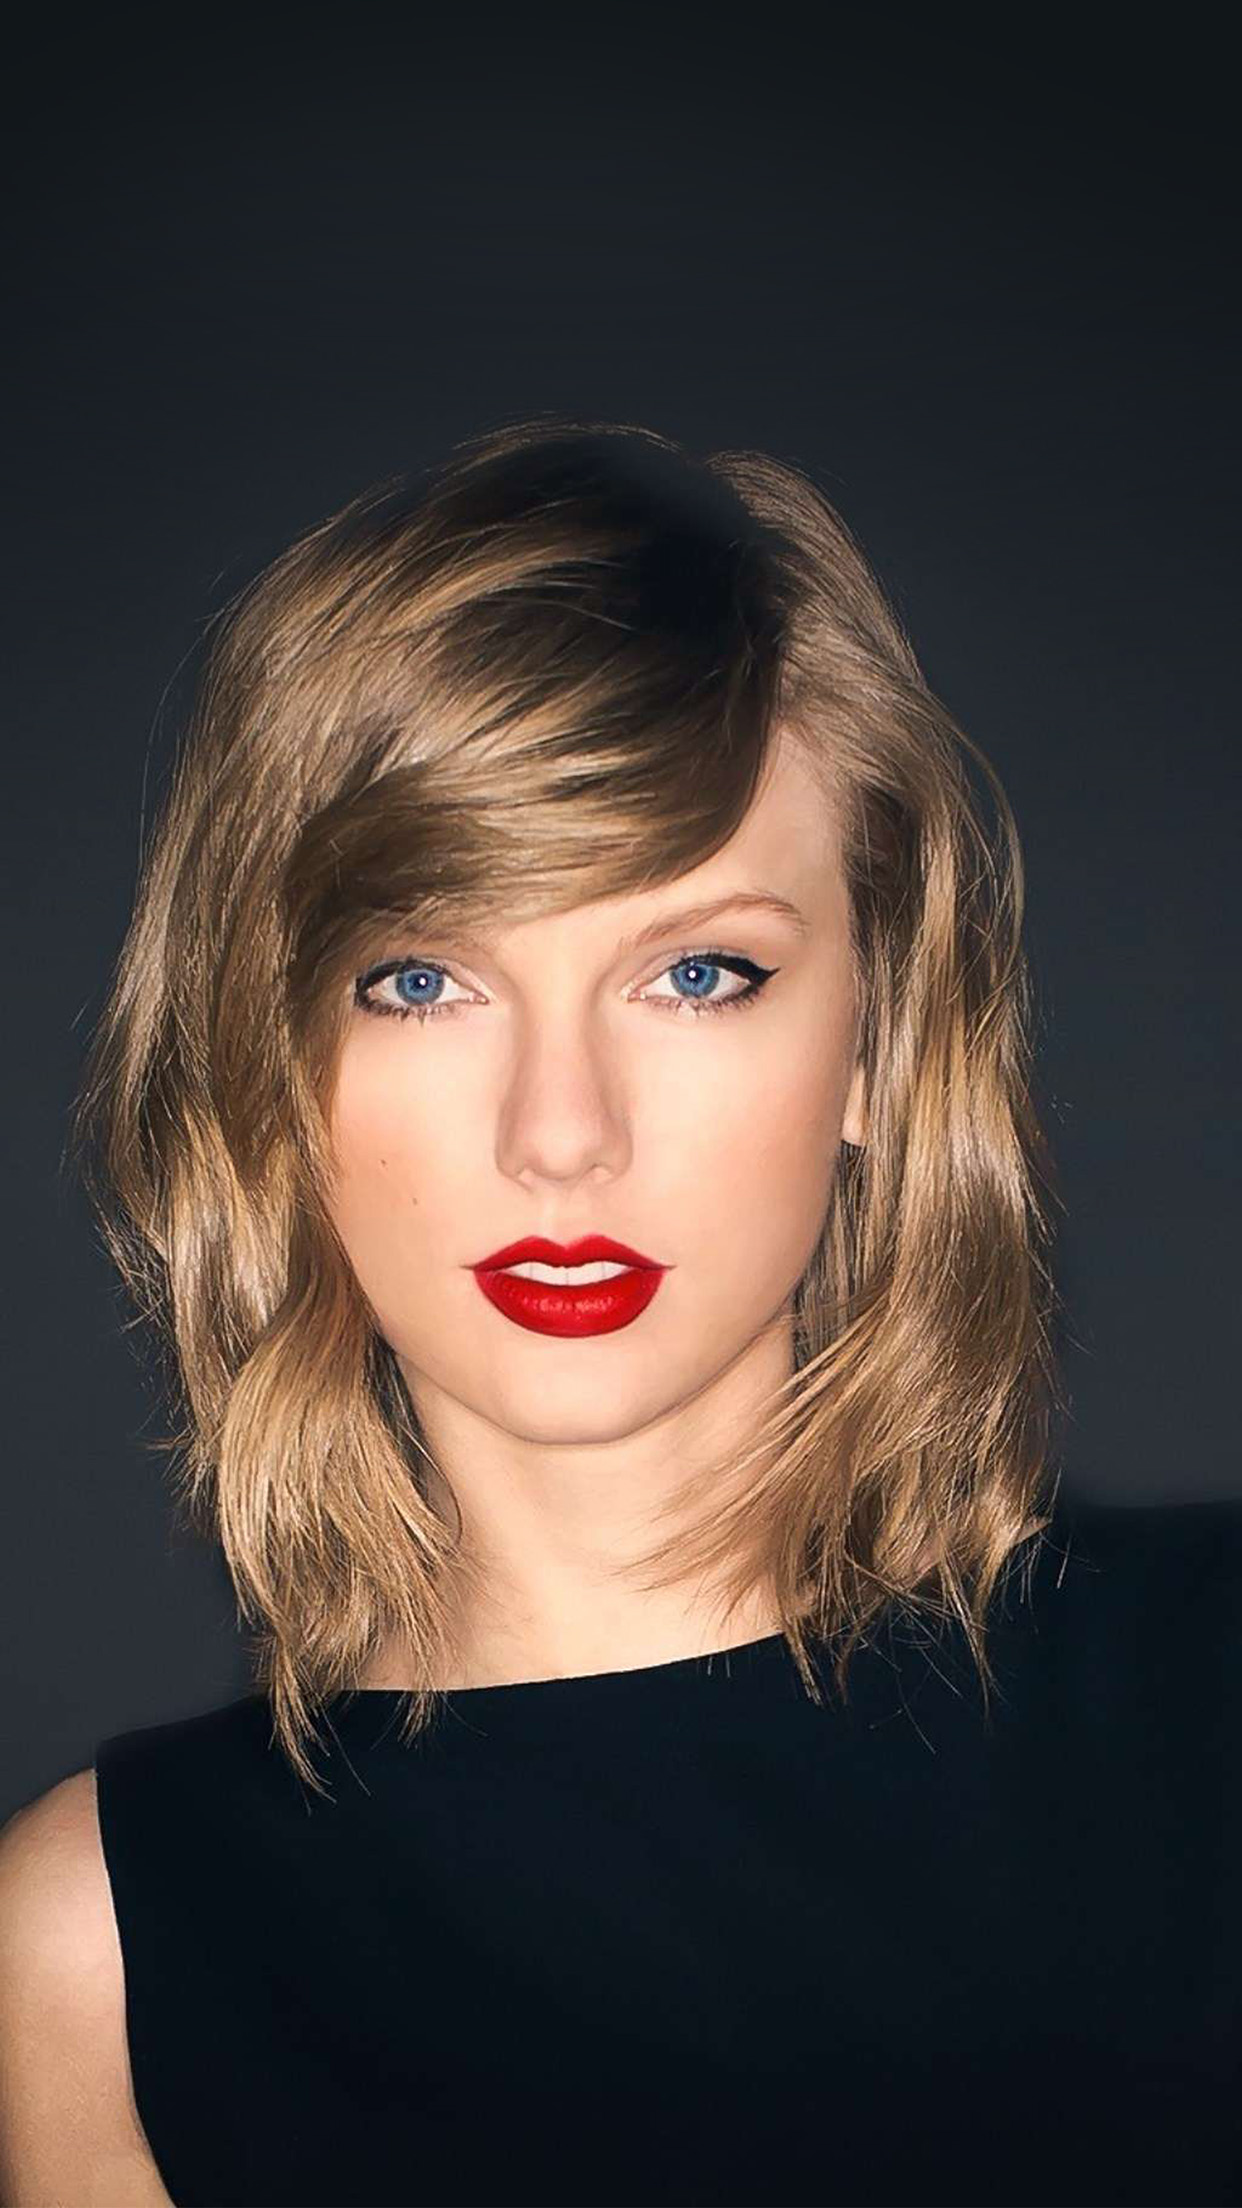 Taylor Swift Dark Lips Music Celebrity Android wallpaper